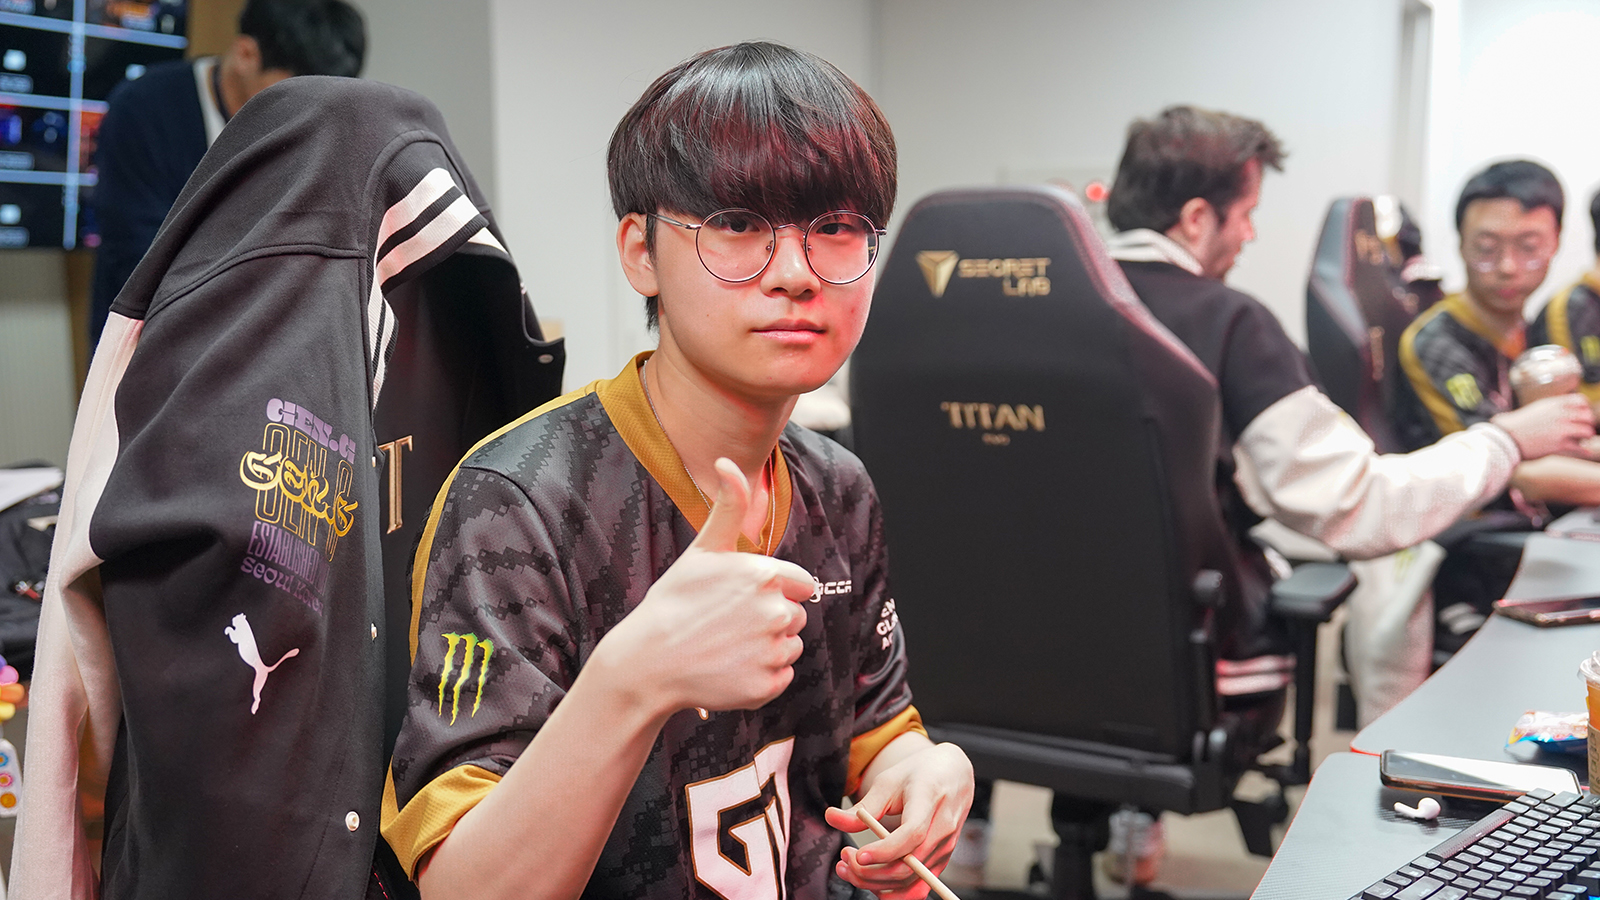 Exclusive: Gen.G k1Ng thinks highly of coach Elmapuddy even though they don’t speak the same language - ONE Esports